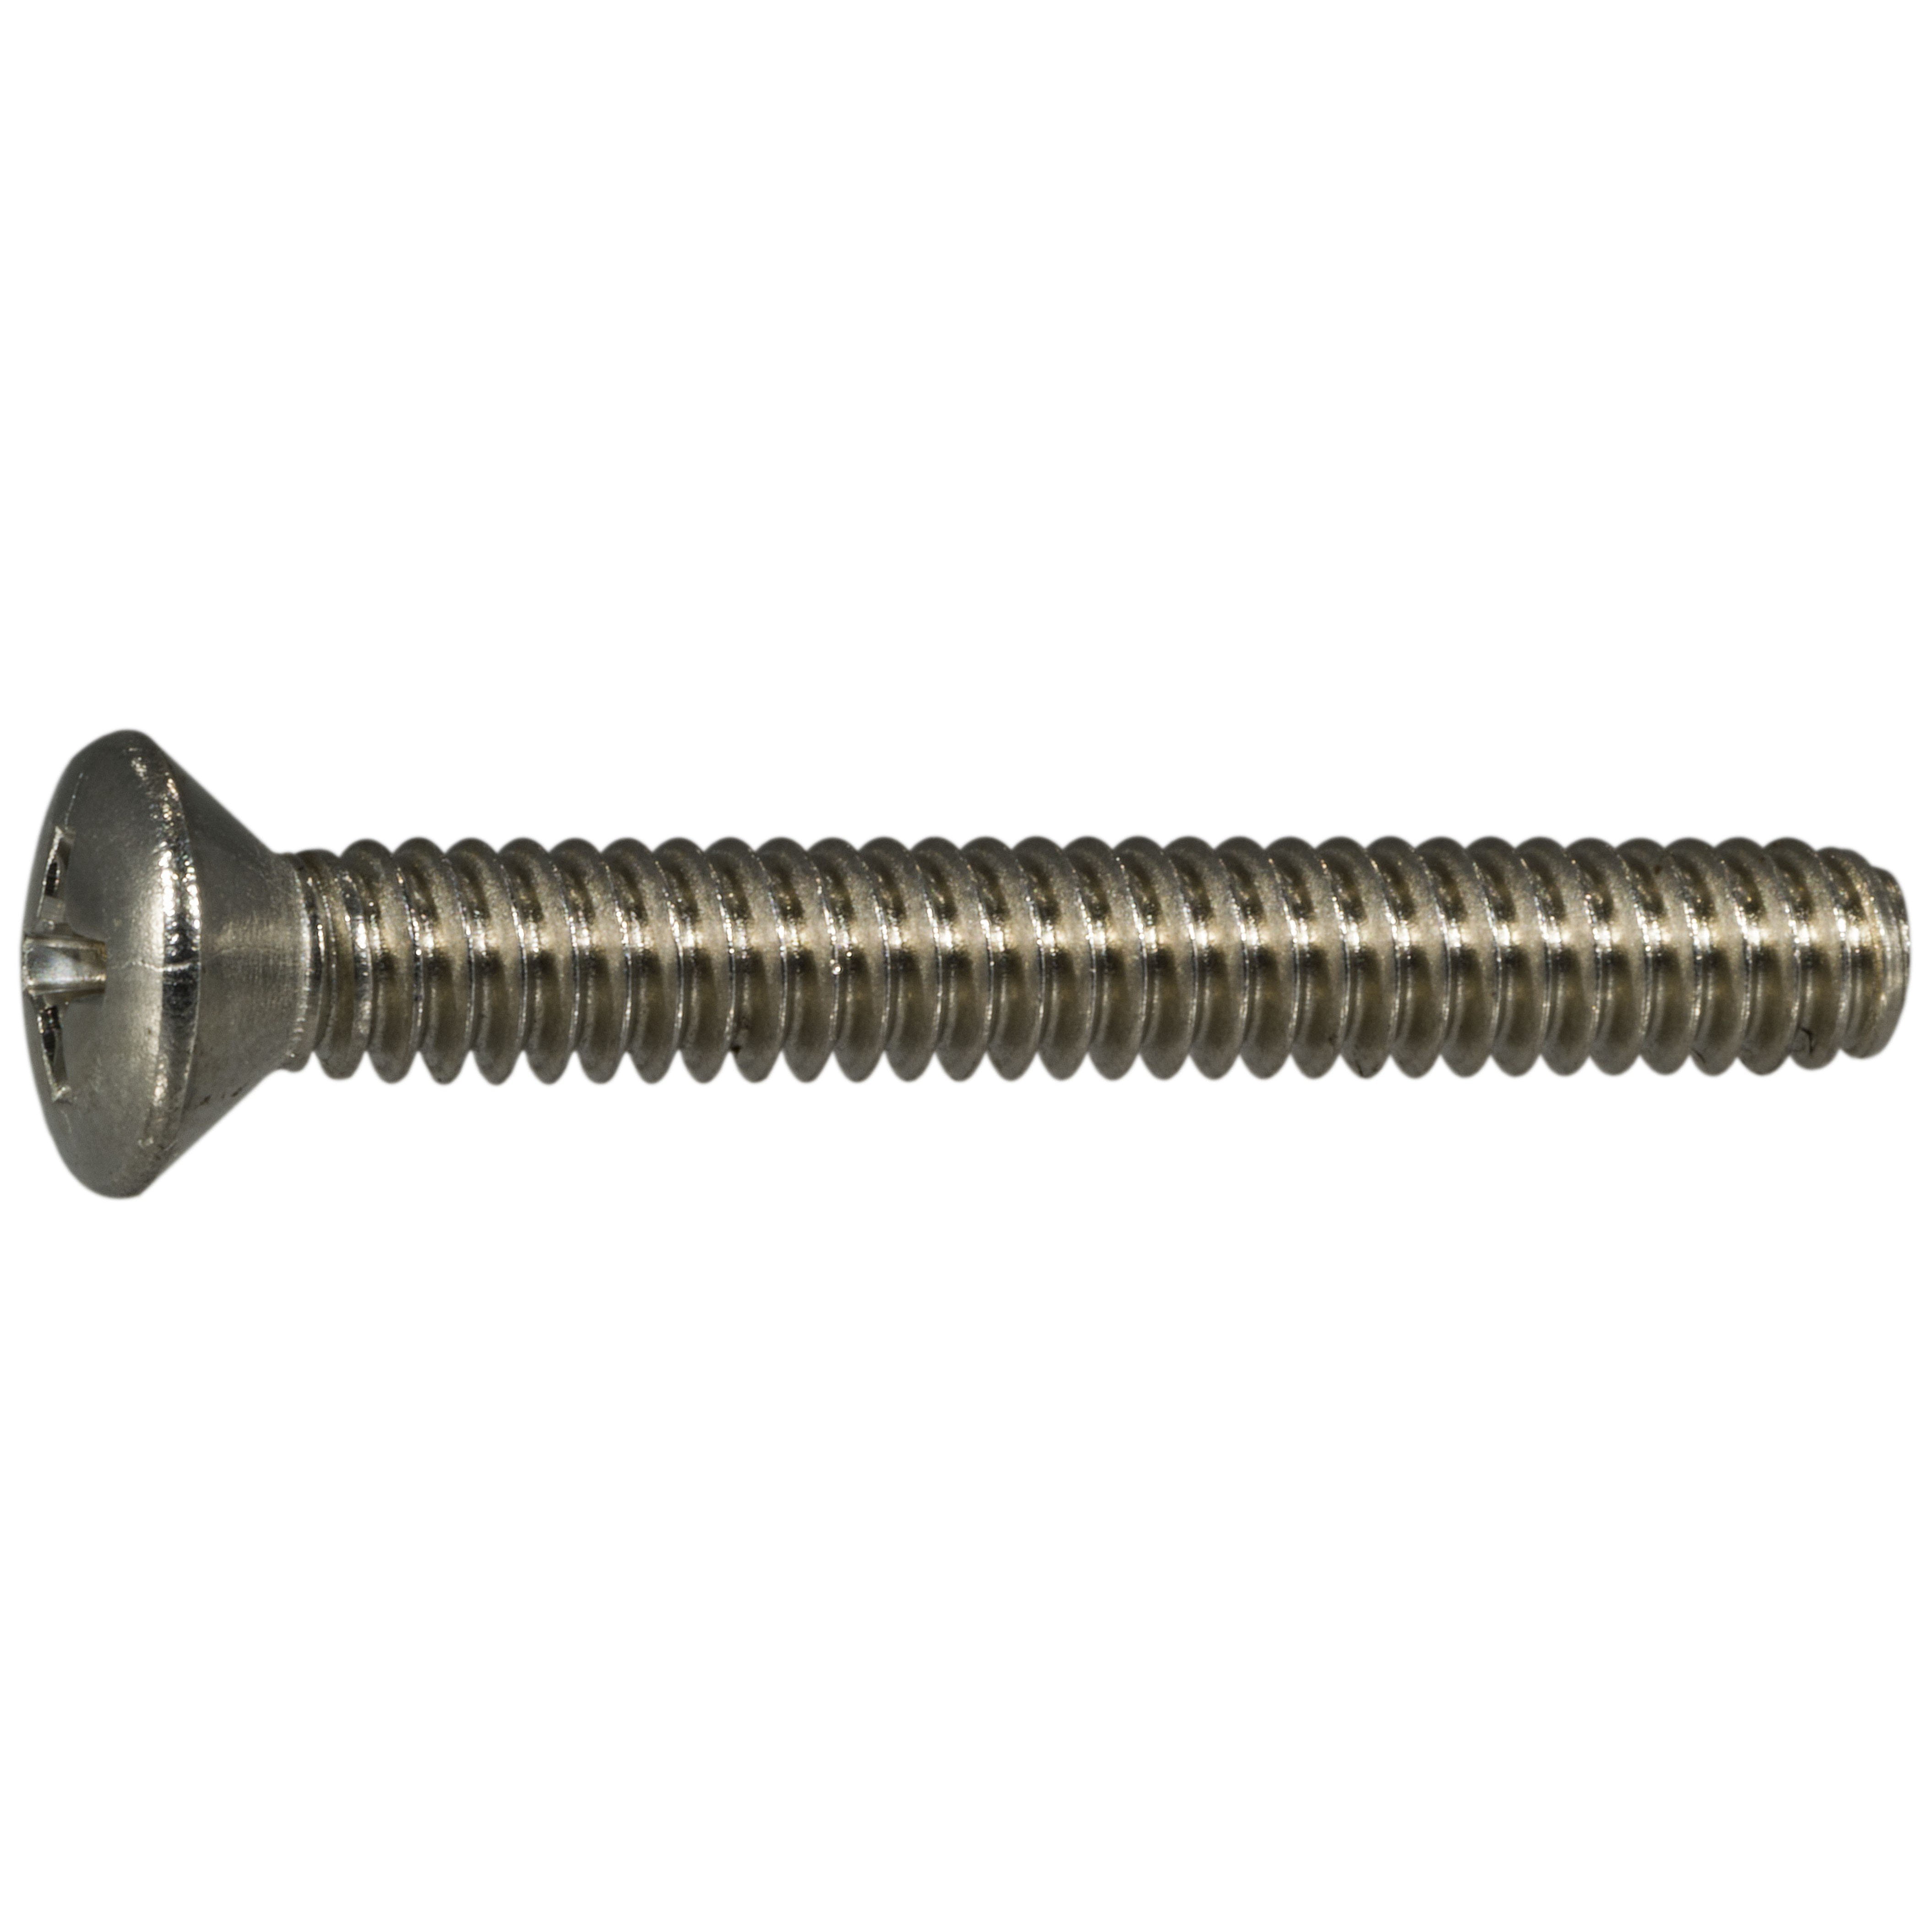 Phillips Oval Head Sheet Metal Screws 18-8 Stainless Steel #10 x 1-1/2 Qty-100 